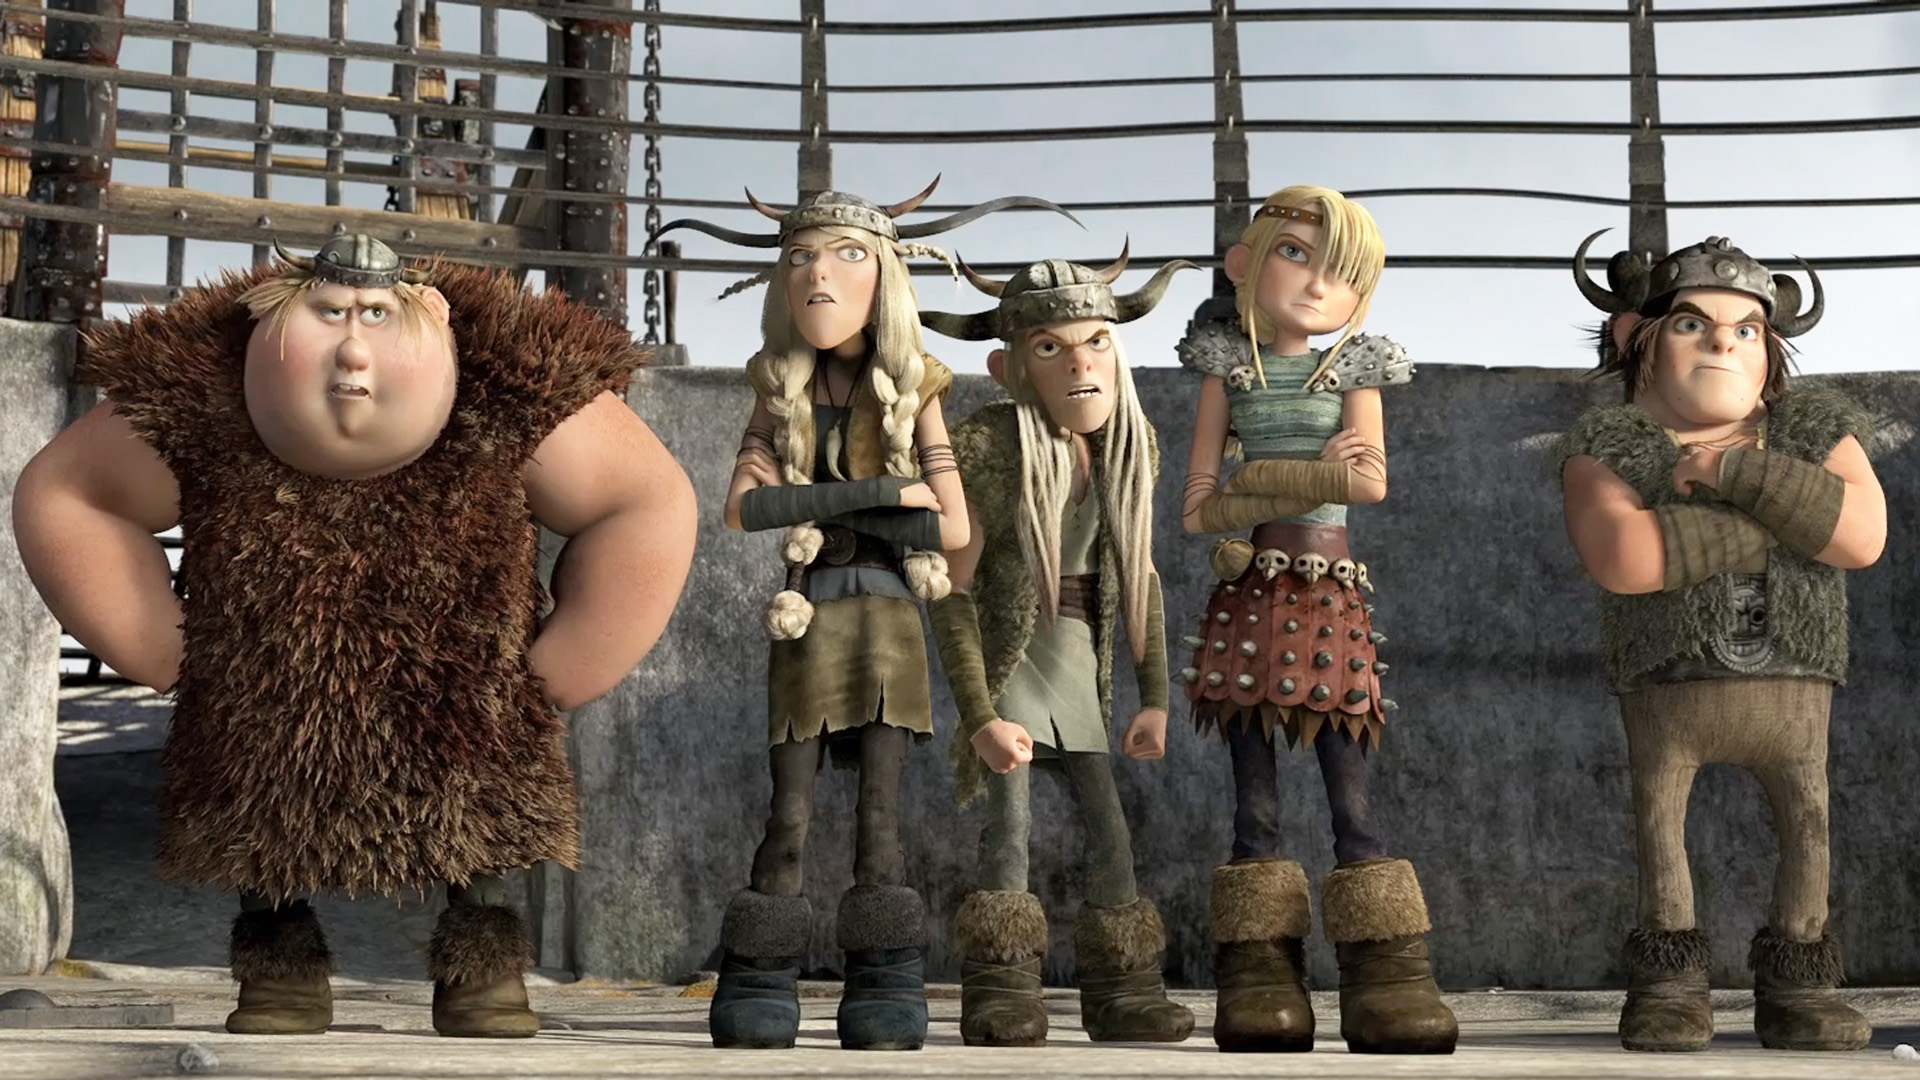 How to Train Your Dragon, Hiccup, astrid, Ruffnut, Tuffnut, Fishlegs, Snotlout - desktop wallpaper